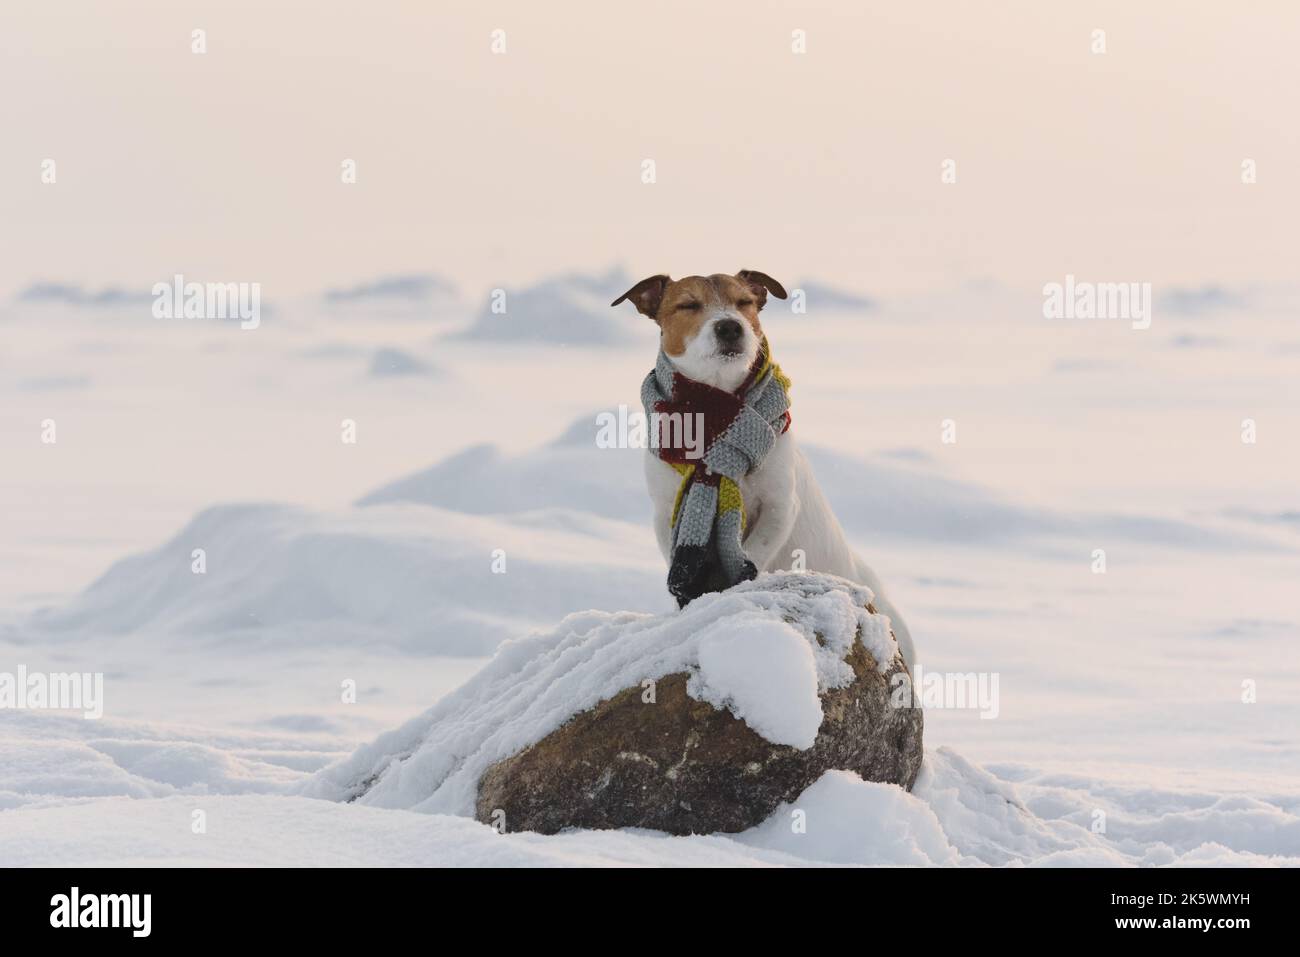 Concept of seasonal care and hypothermia protection for pets. Dog wearing scarf standing on ice in winter snowy landscape Stock Photo